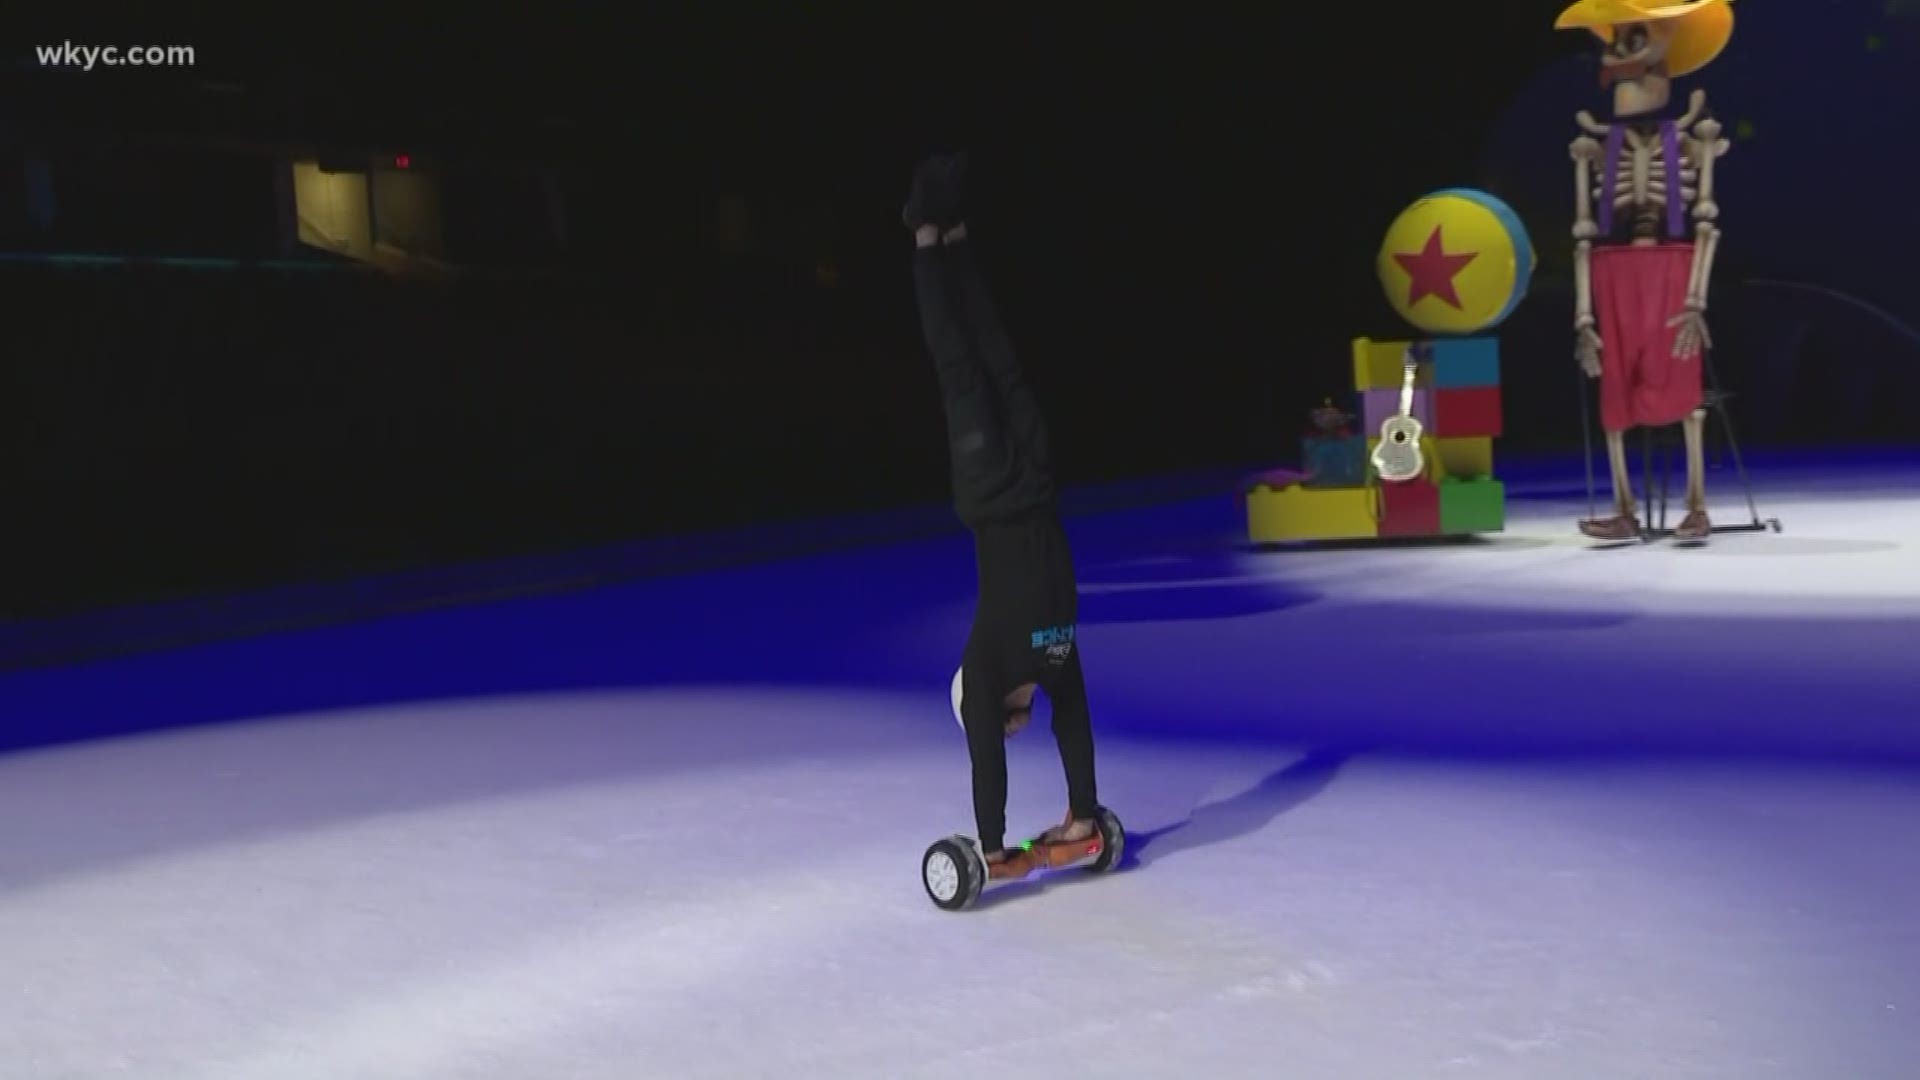 Jan. 17, 2019: Disney on Ice is back in Cleveland, and our own Jasmine Monroe hit the ice for a special sneak peek at how the show is using hover boards for some exciting action.